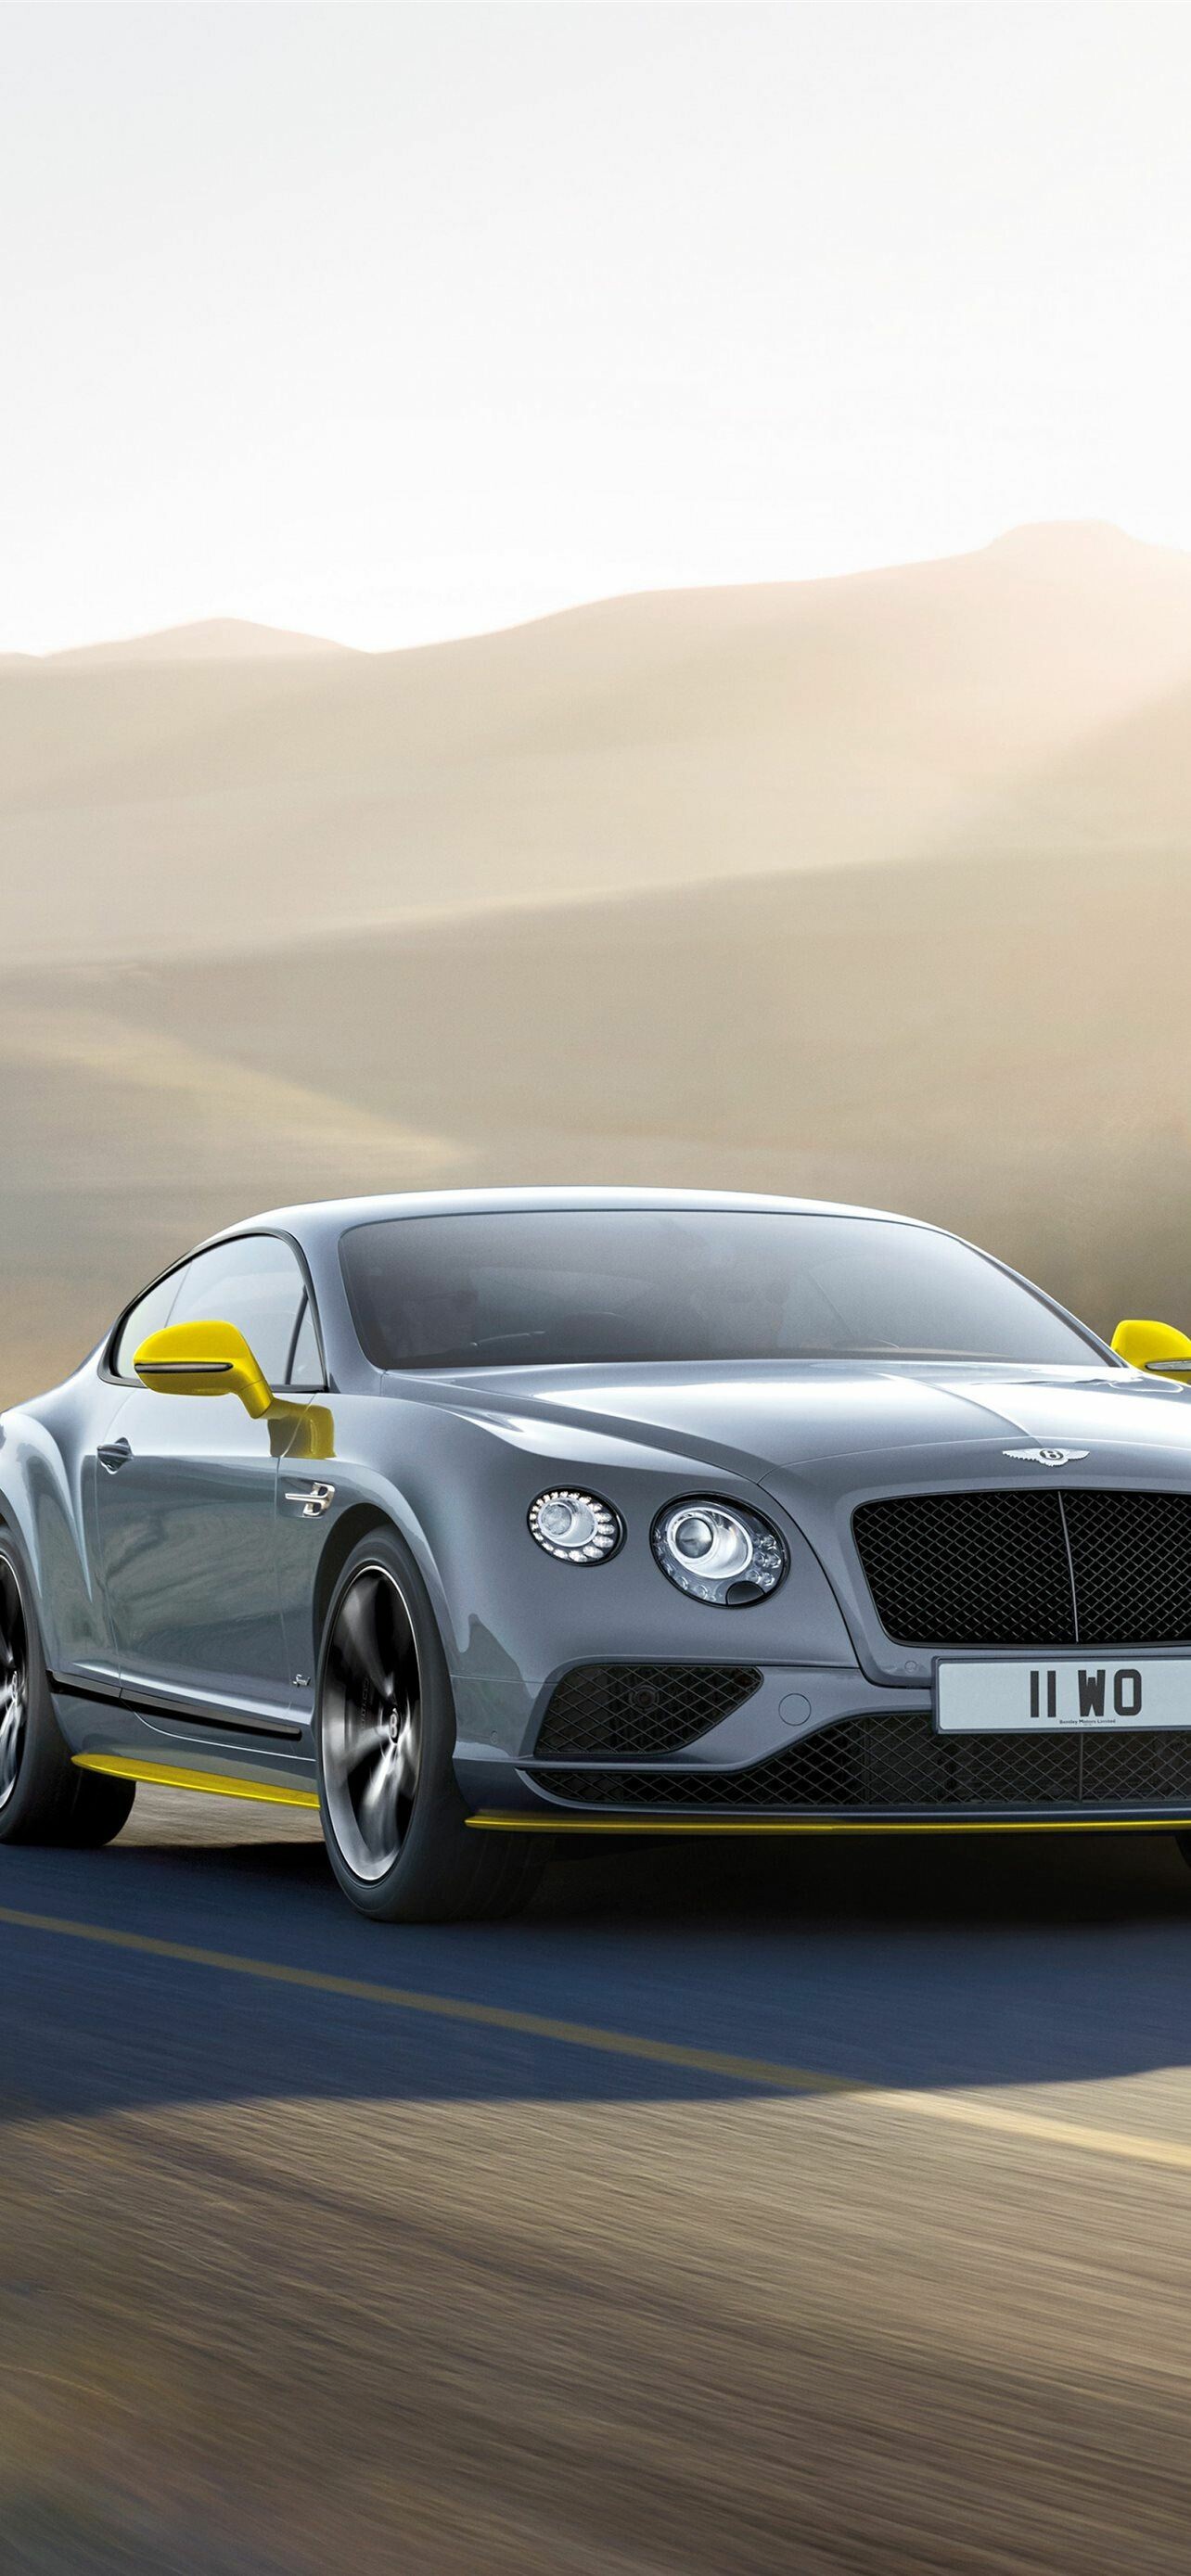 Bentley: The famous luxury auto brand was acquired by Volkswagen AG in 1998 and is still under the company’s ownership. 1290x2780 HD Wallpaper.